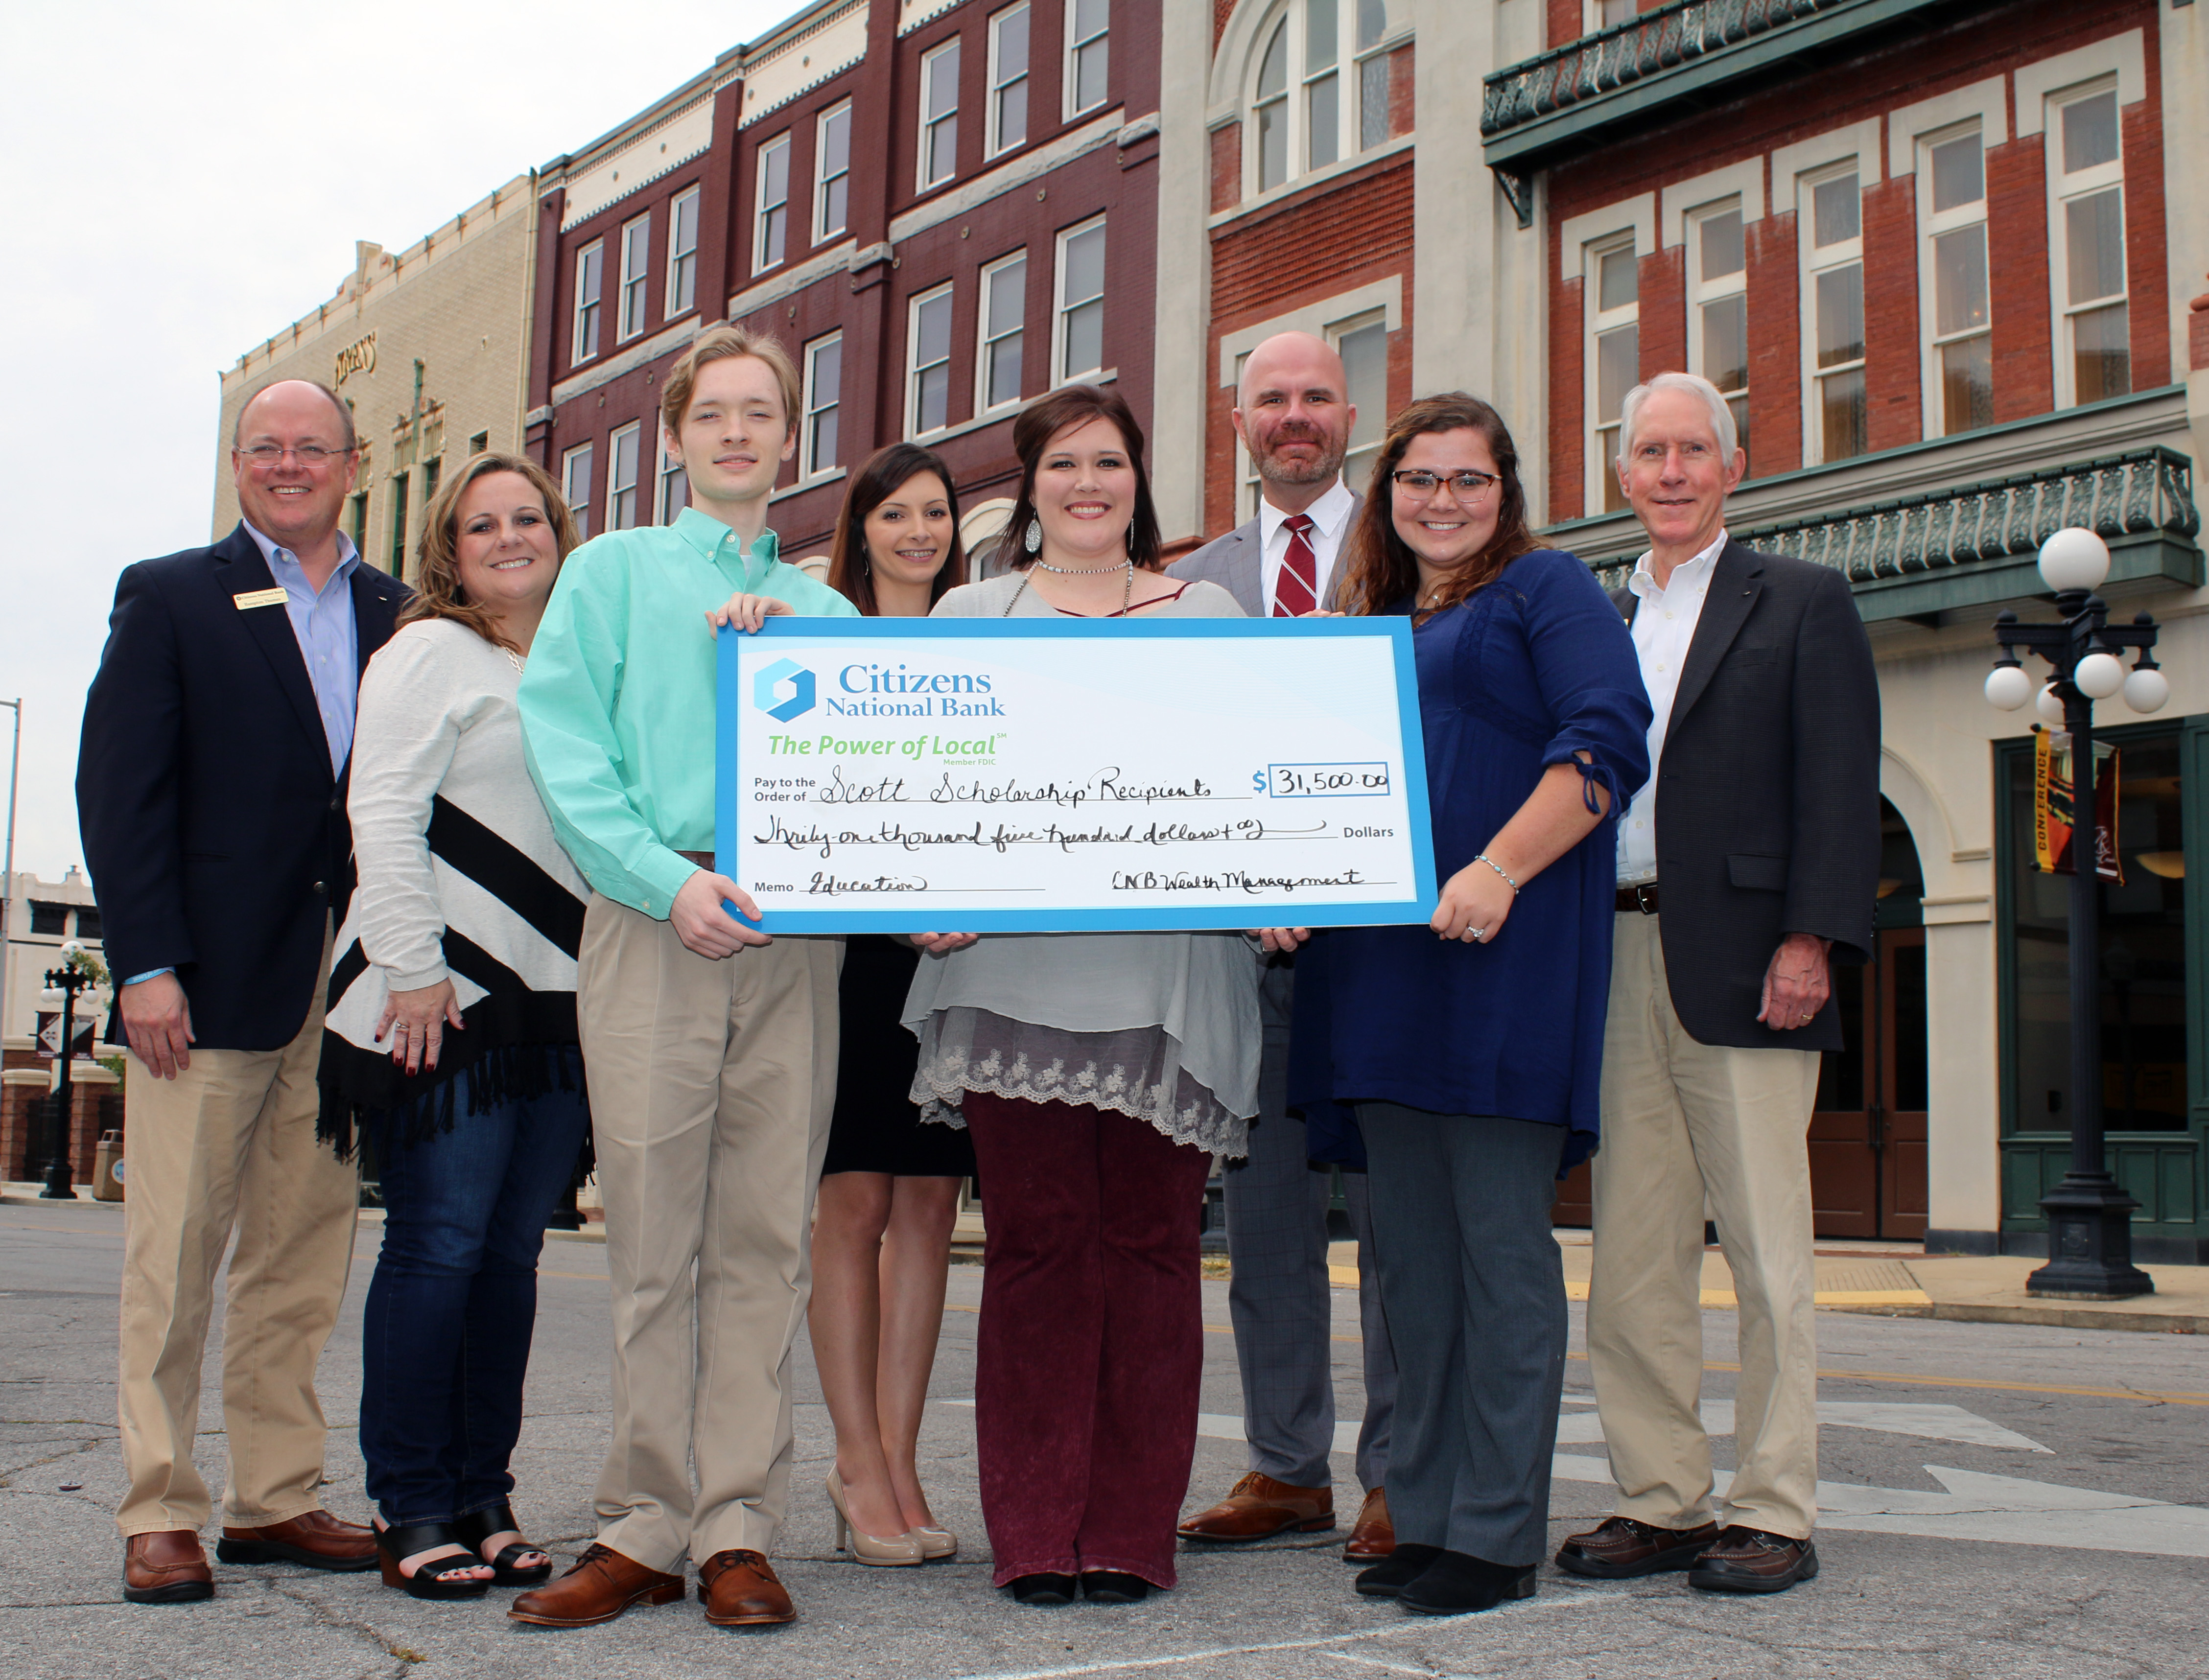 MSU-Meridian scholarships awarded through Scotts’ planned gift